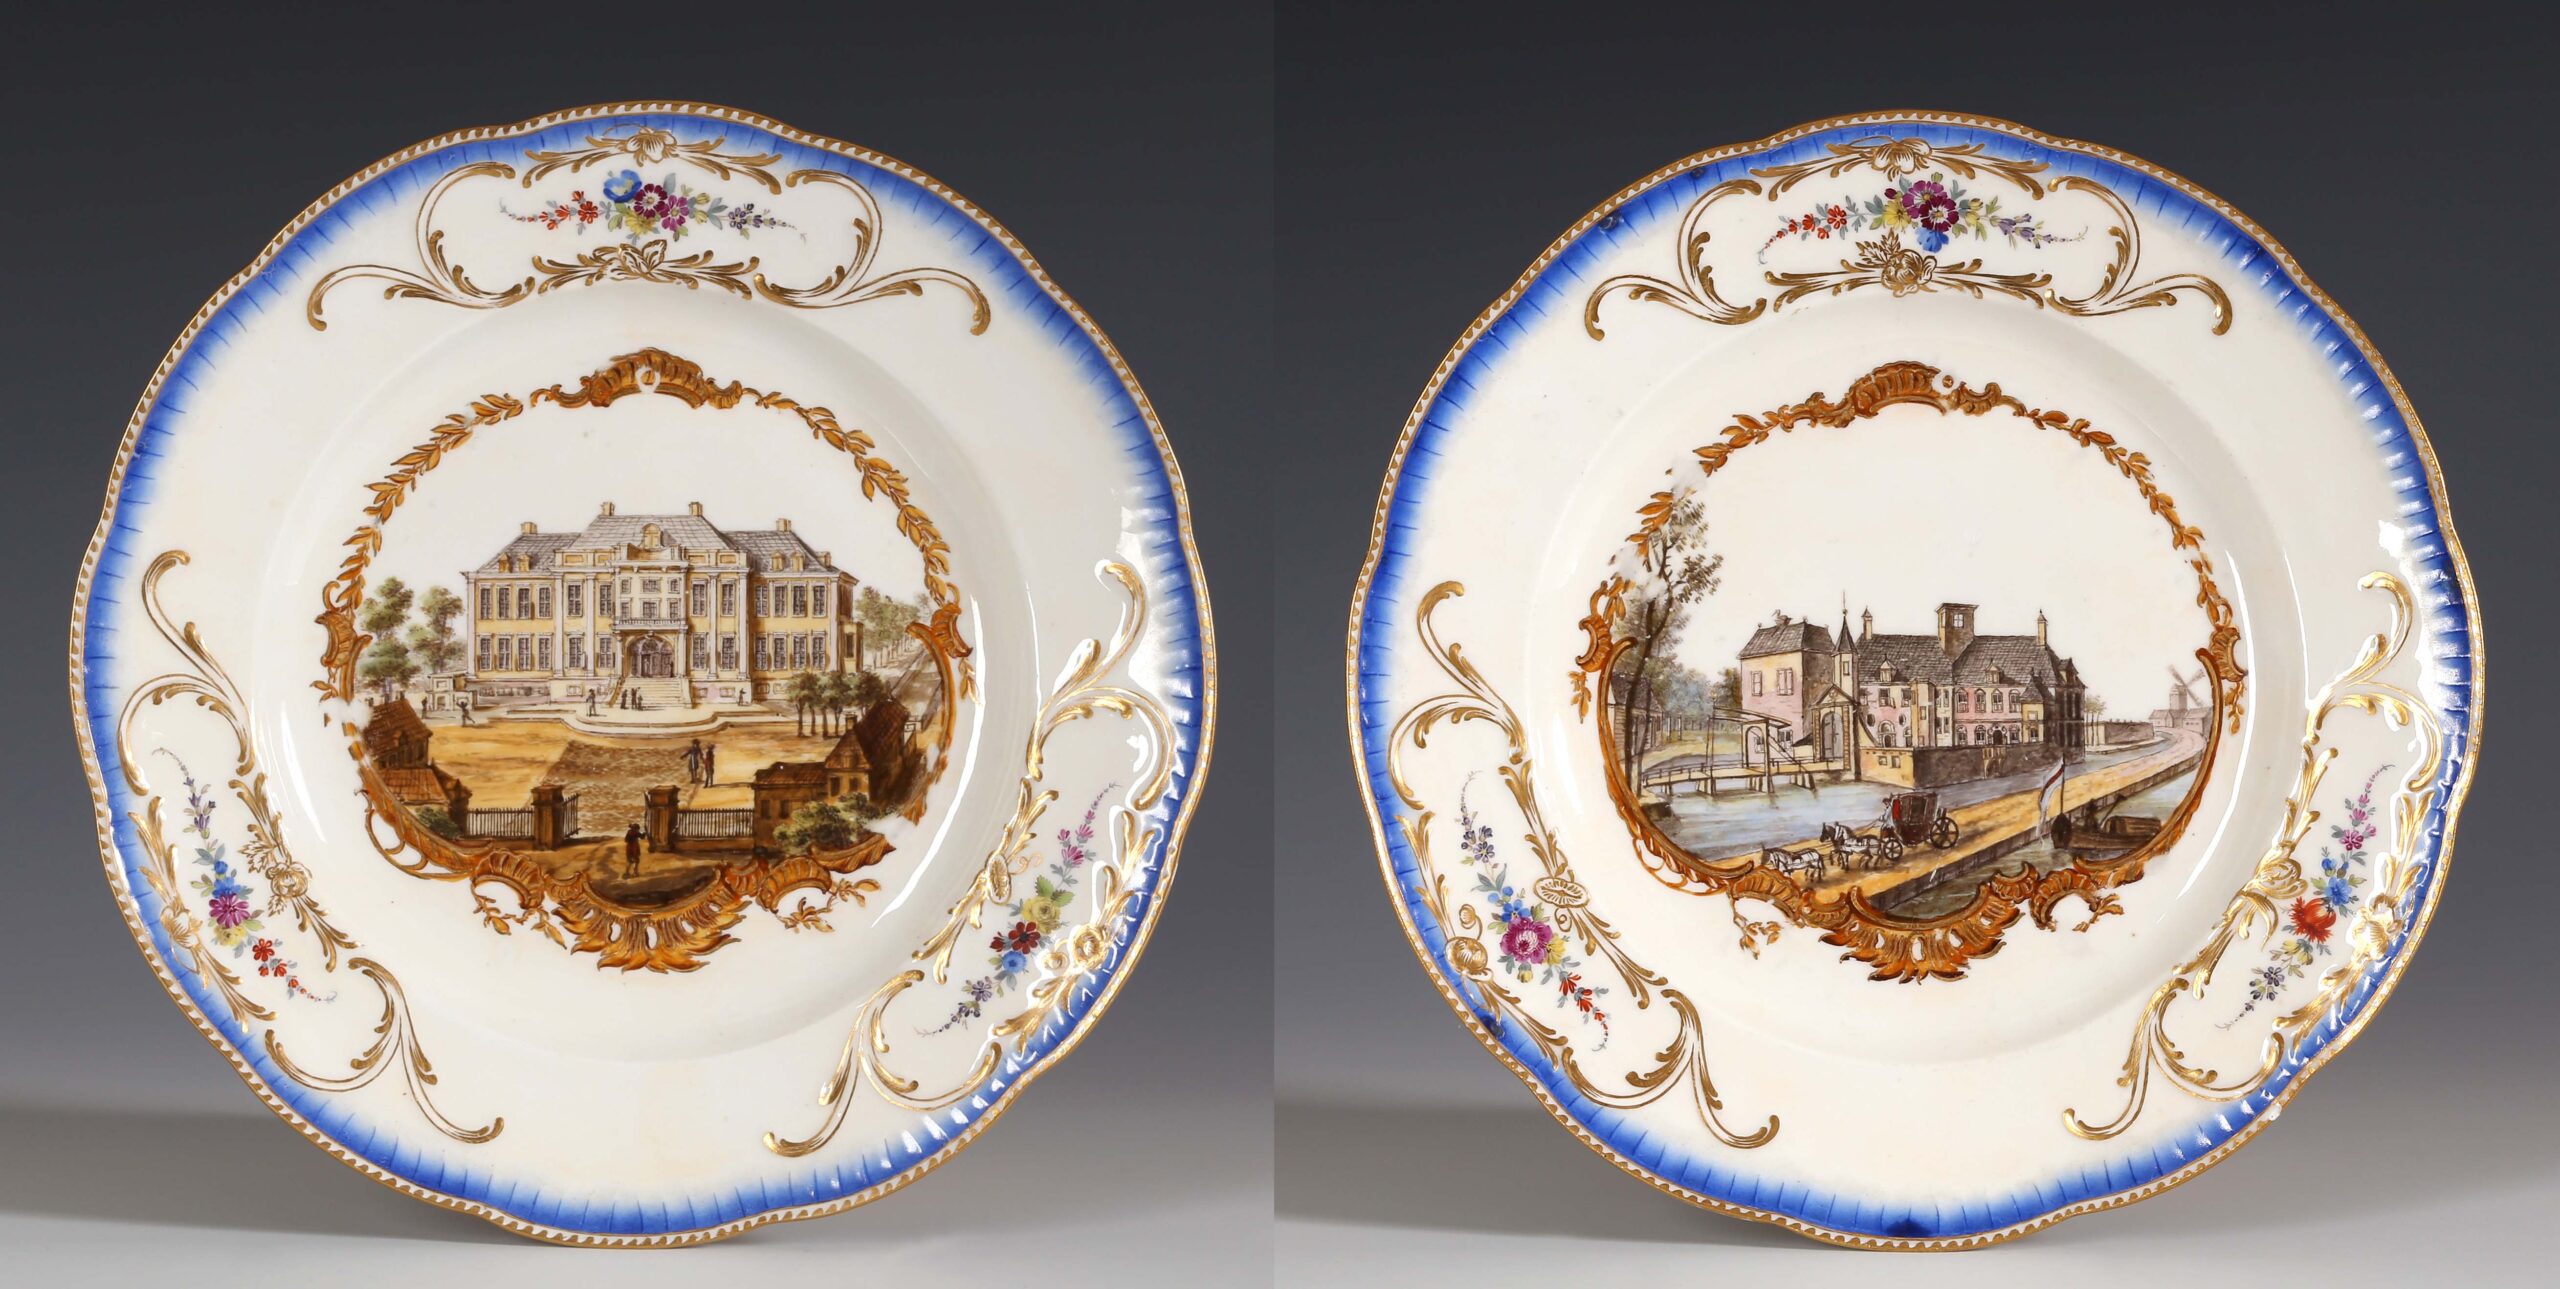 TWO MEISSEN PLATES FROM THE STADHOLDER SERVICE  FOR WILLIAM V, PRINCE OF ORANGE AND NASSAU